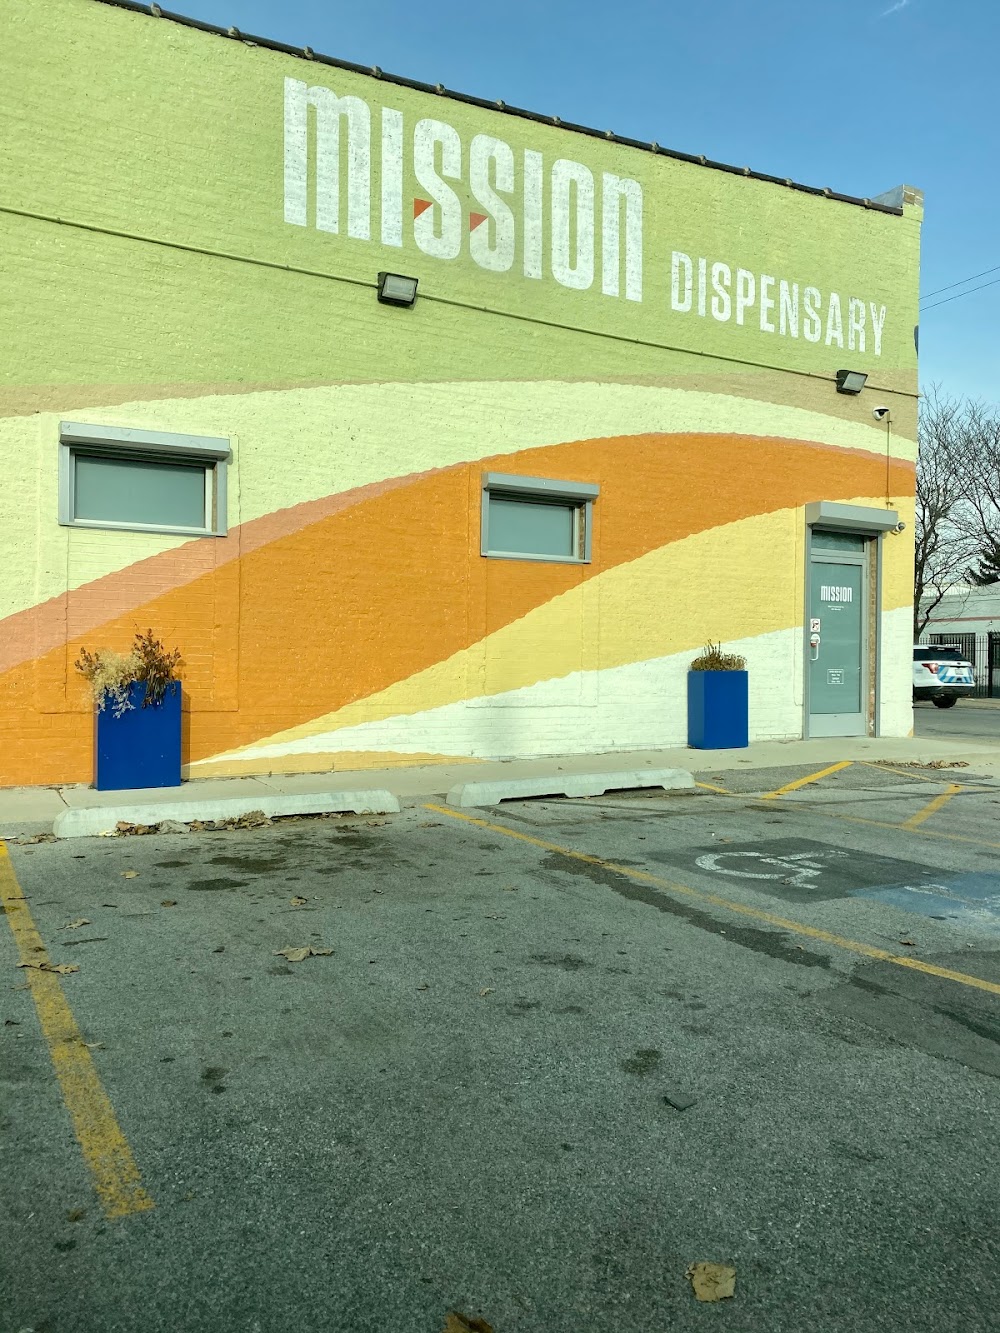 Mission South Chicago Cannabis Dispensary